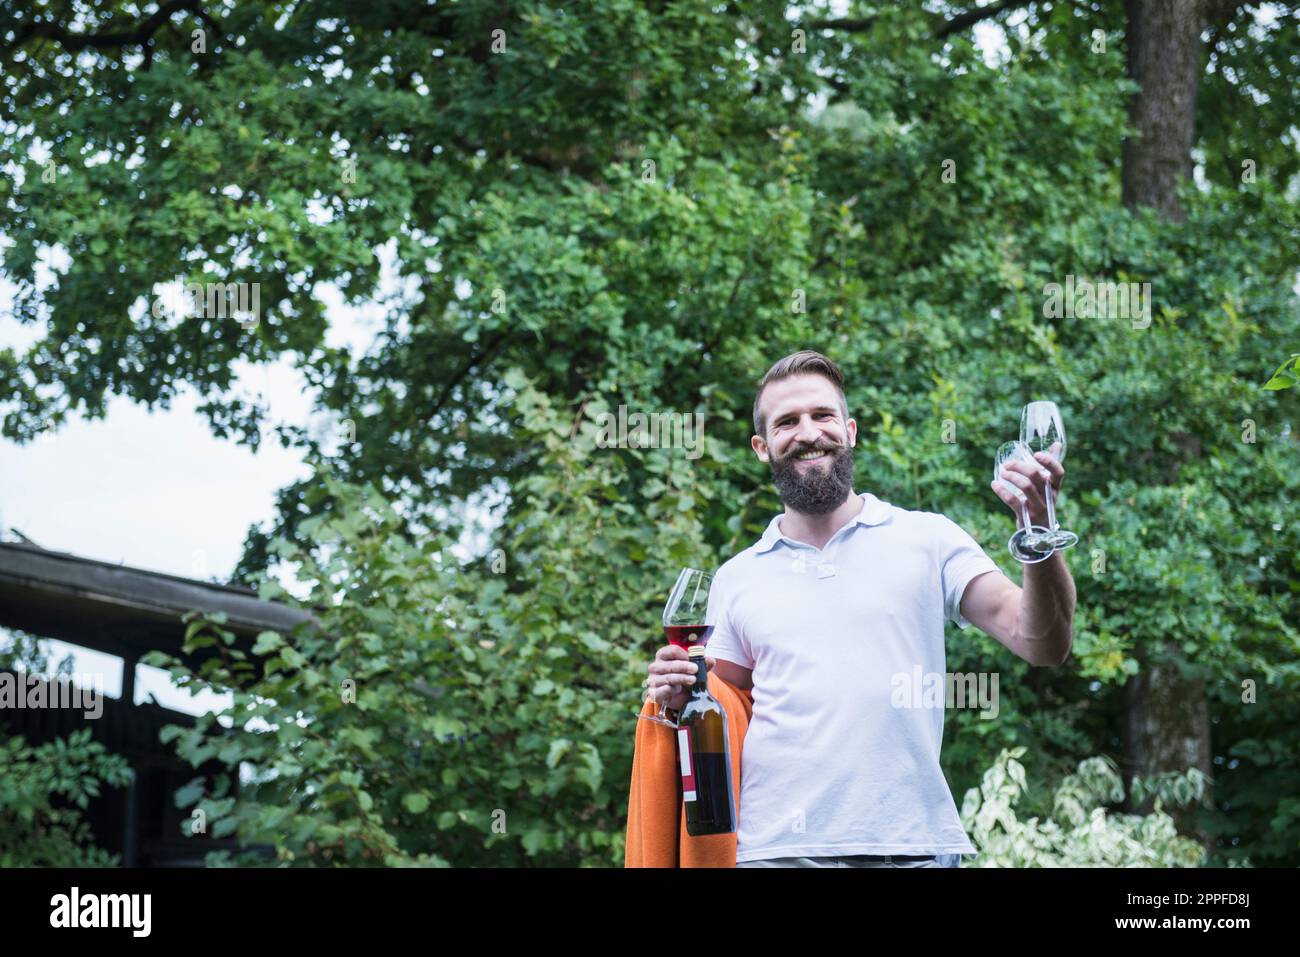 Young man with a blanket and wine glasses in garden, Bavaria, Germany Stock Photo